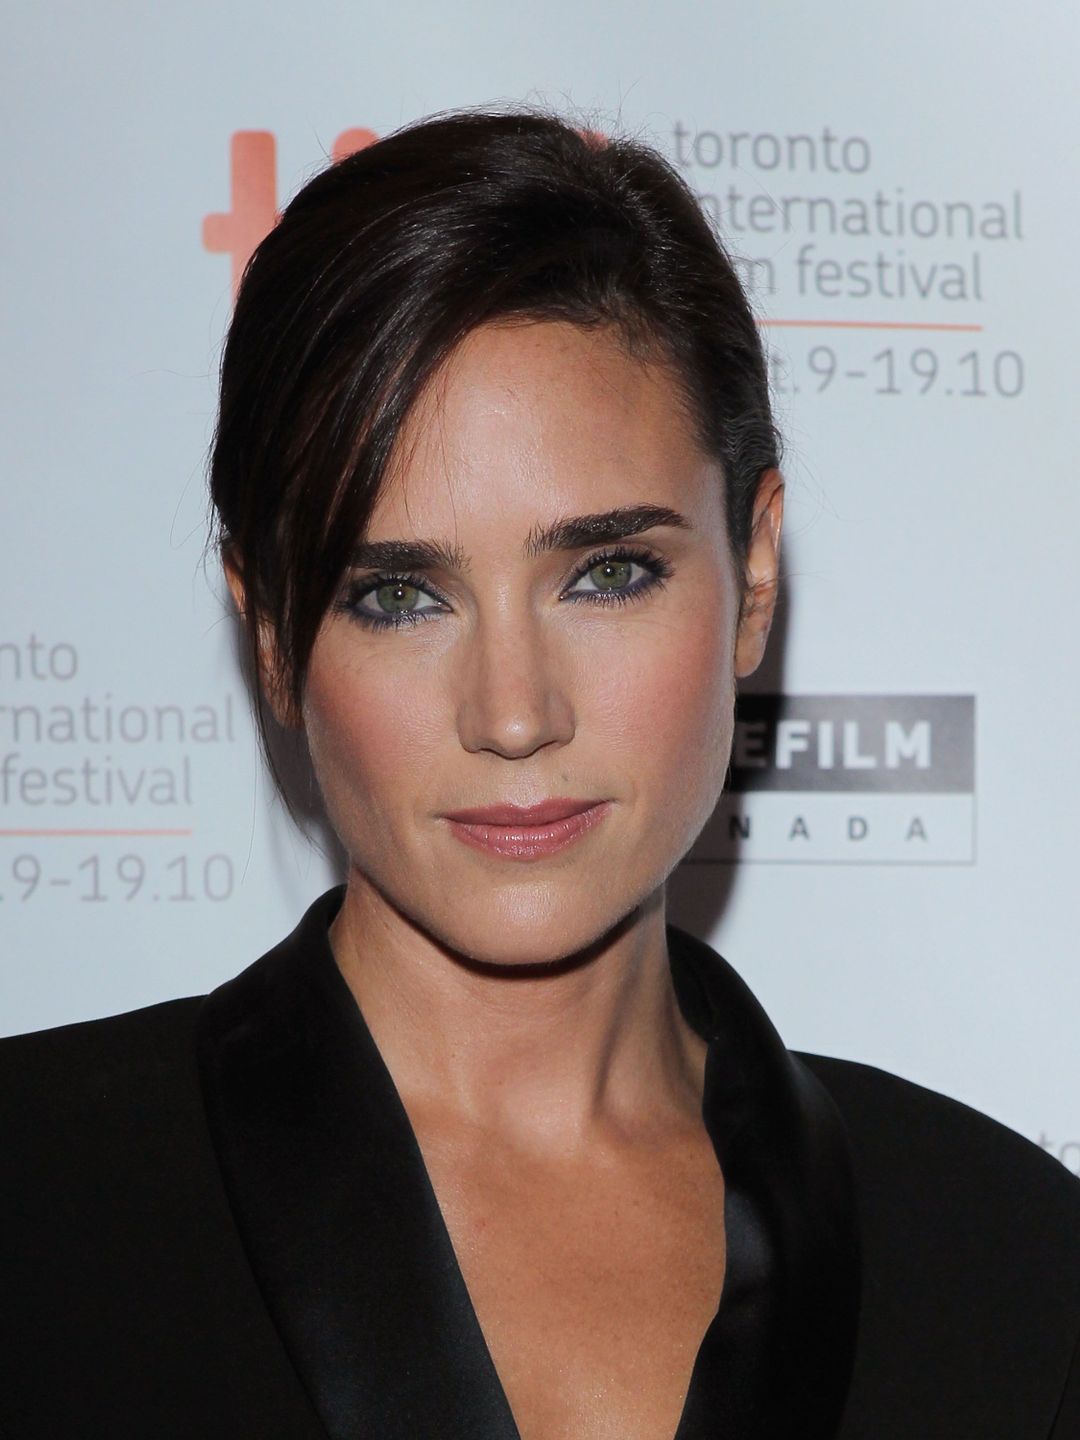 Jennifer Connelly early childhood